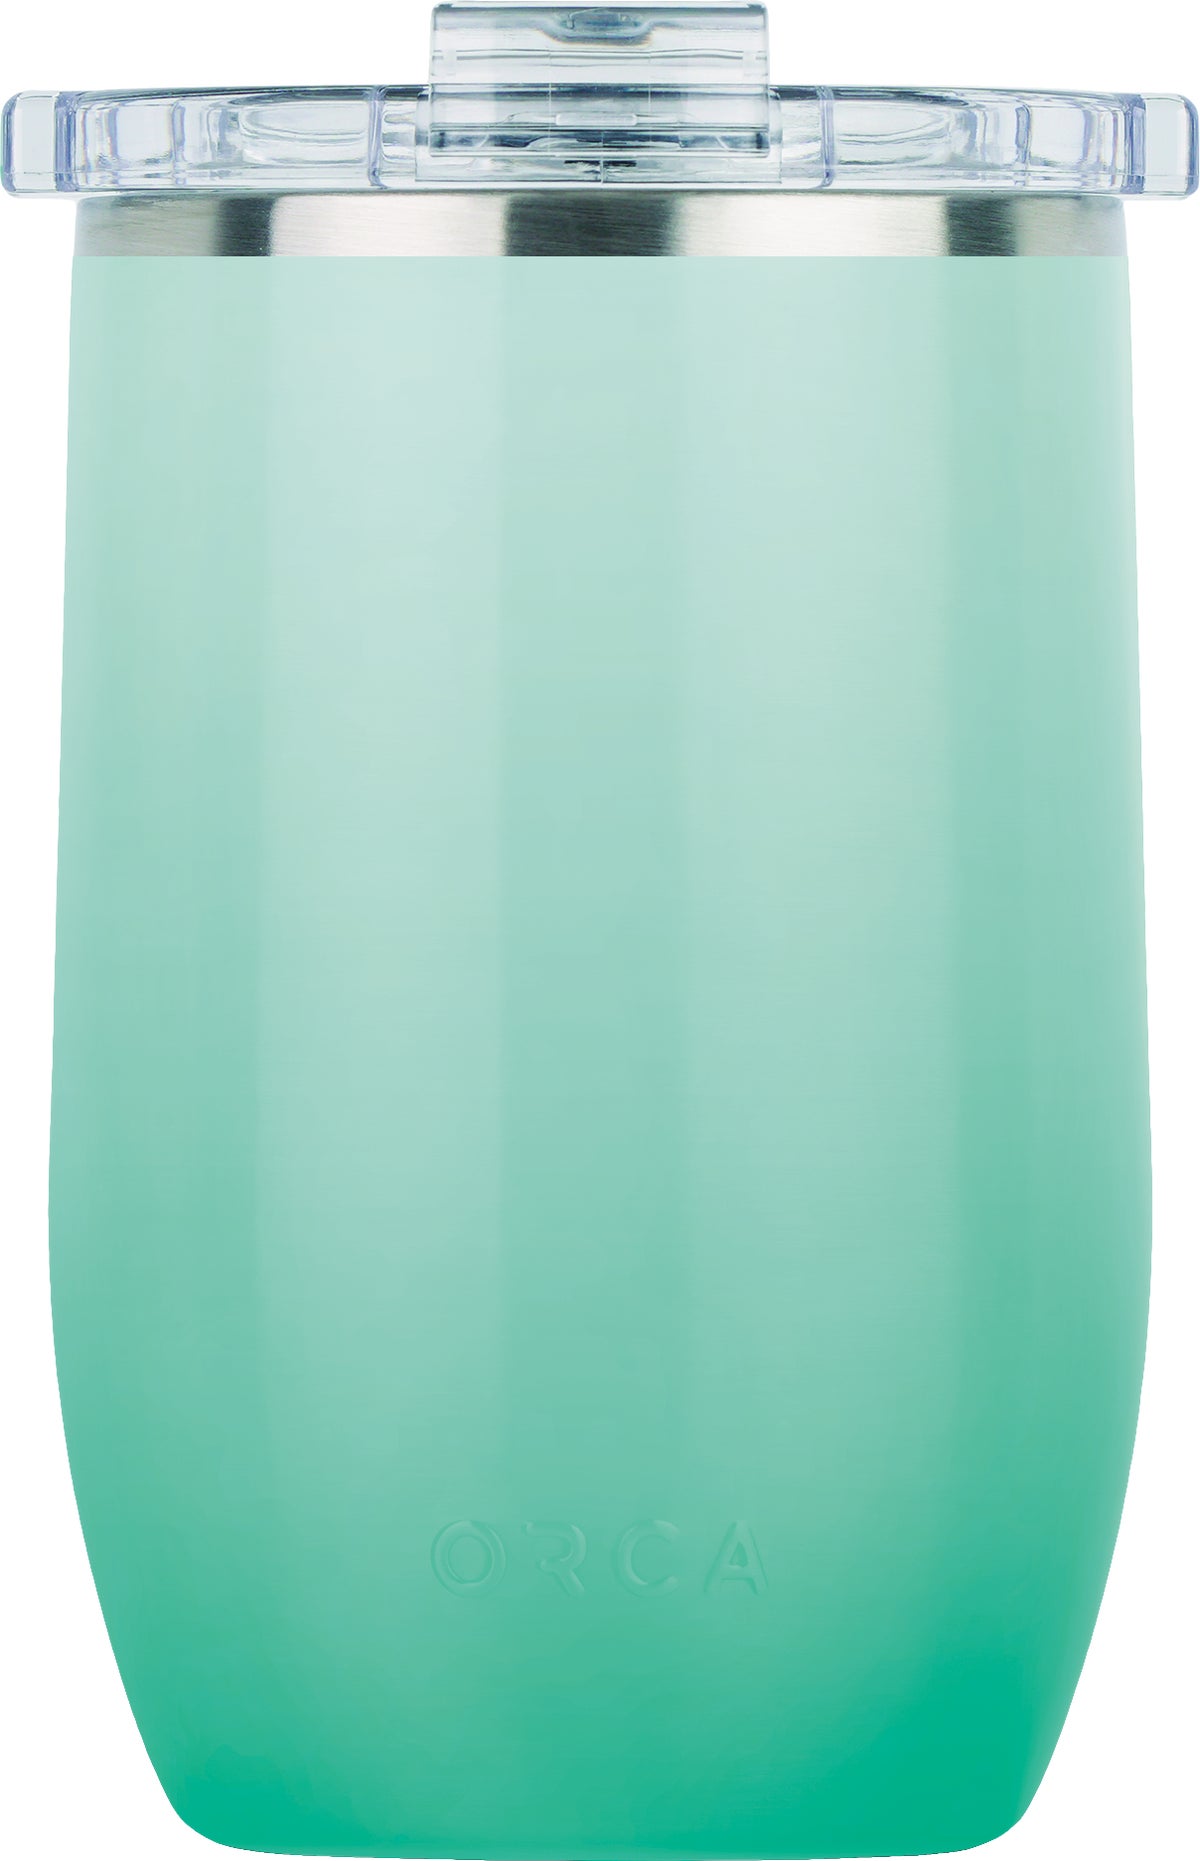 PELICAN 22 Oz. Seafoam Green Stainless Steel Insulated Tumbler with Slide  Closure